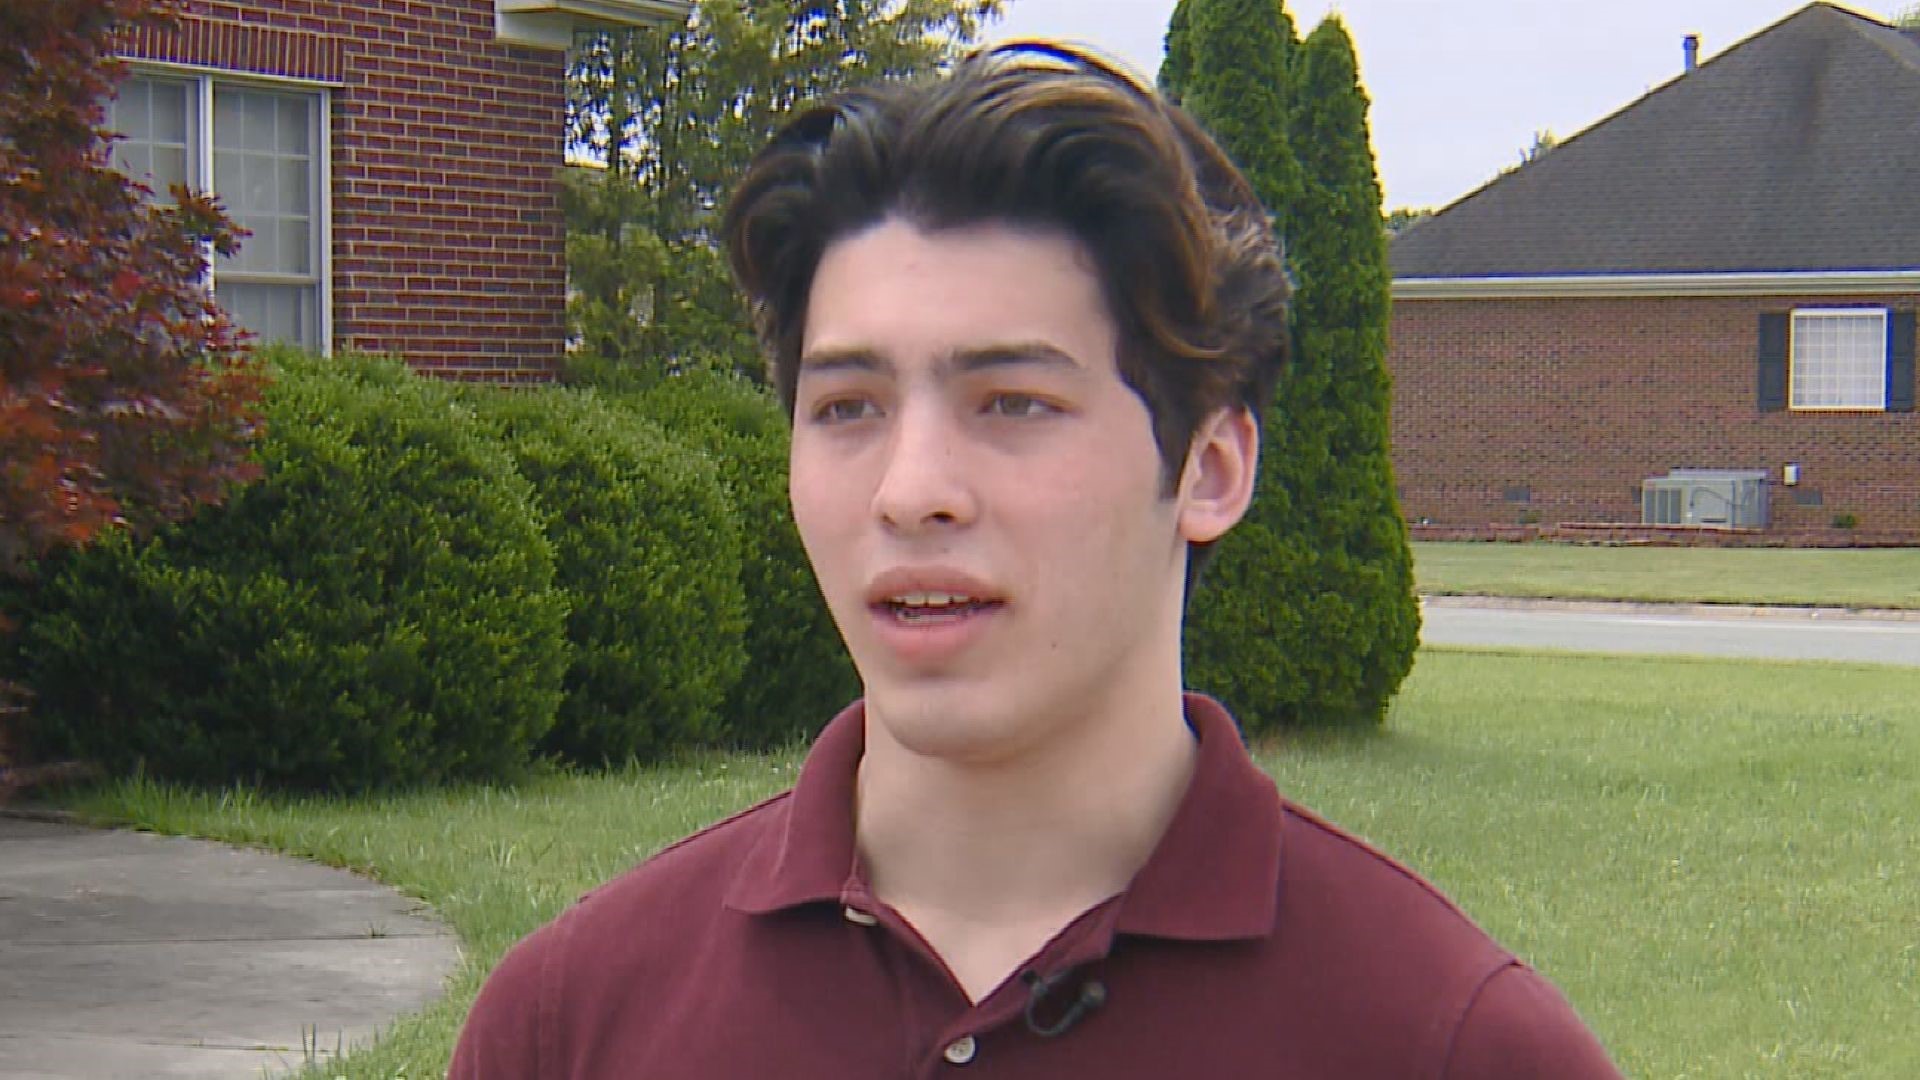 18-year-old Alex Solari says he "led the pack"' and apologizes for pranks that involved pouring cement into toilets.